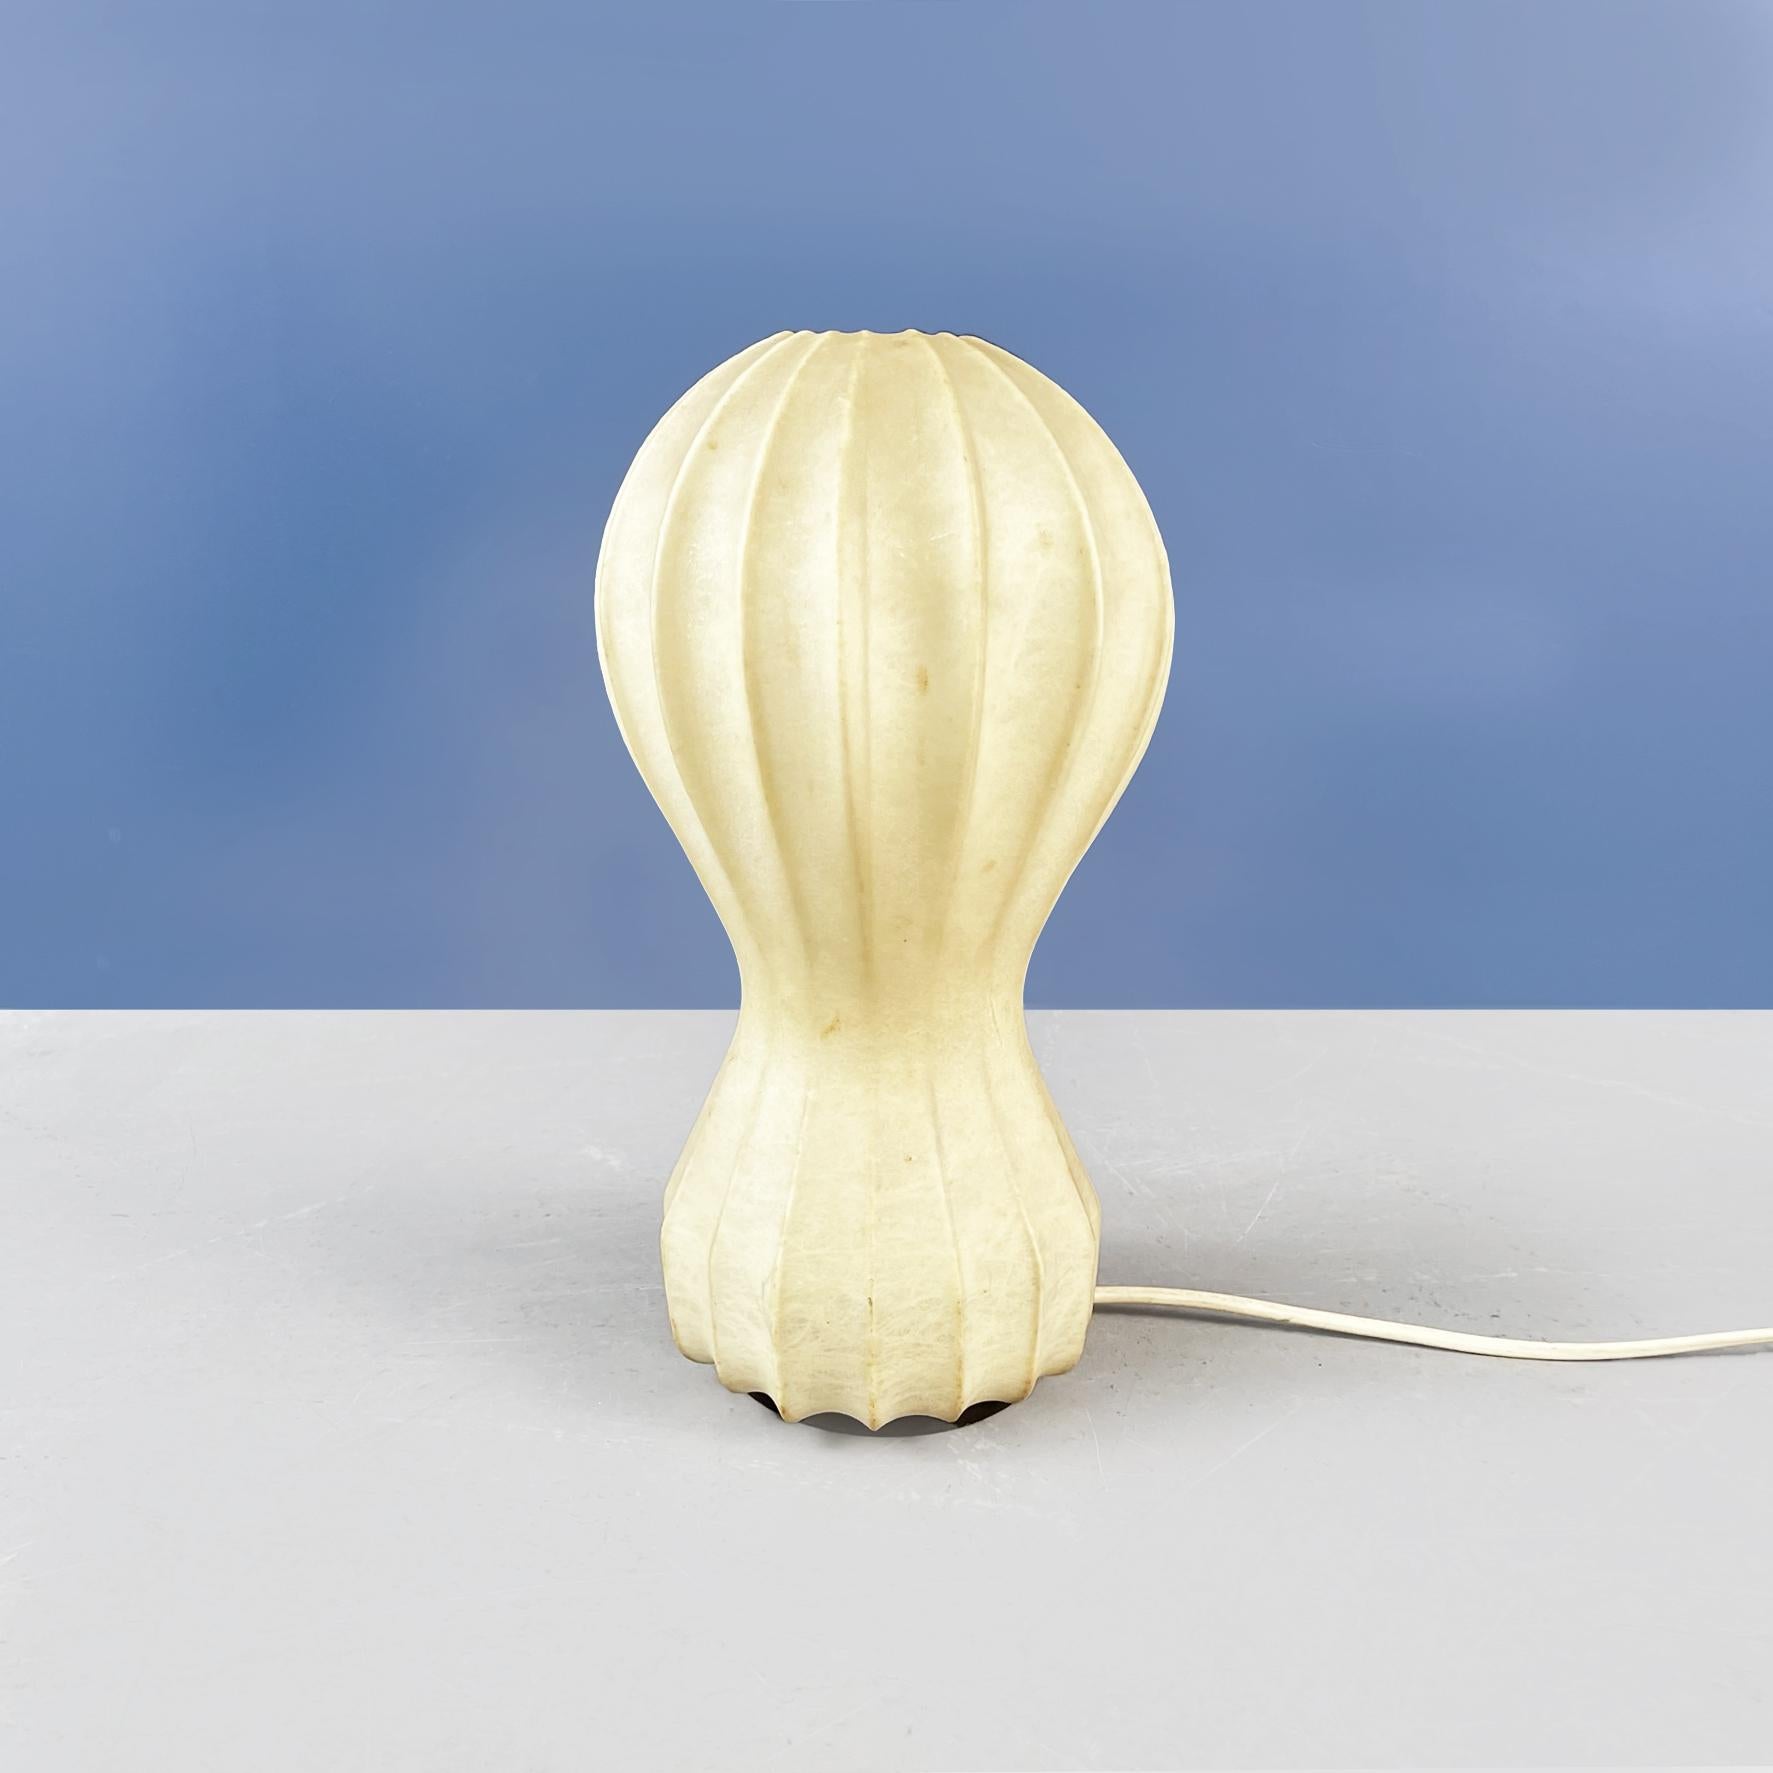 Italian mid-century Cocoon table lamp Gatto by Castiglioni for Flos, 1960s
Table lamp mod. Gatto (Cat) in beige cocoon. The structure is given by a series of thin metal tubes, entirely covered in cocoon. Its shape is rounded in the upper part, then